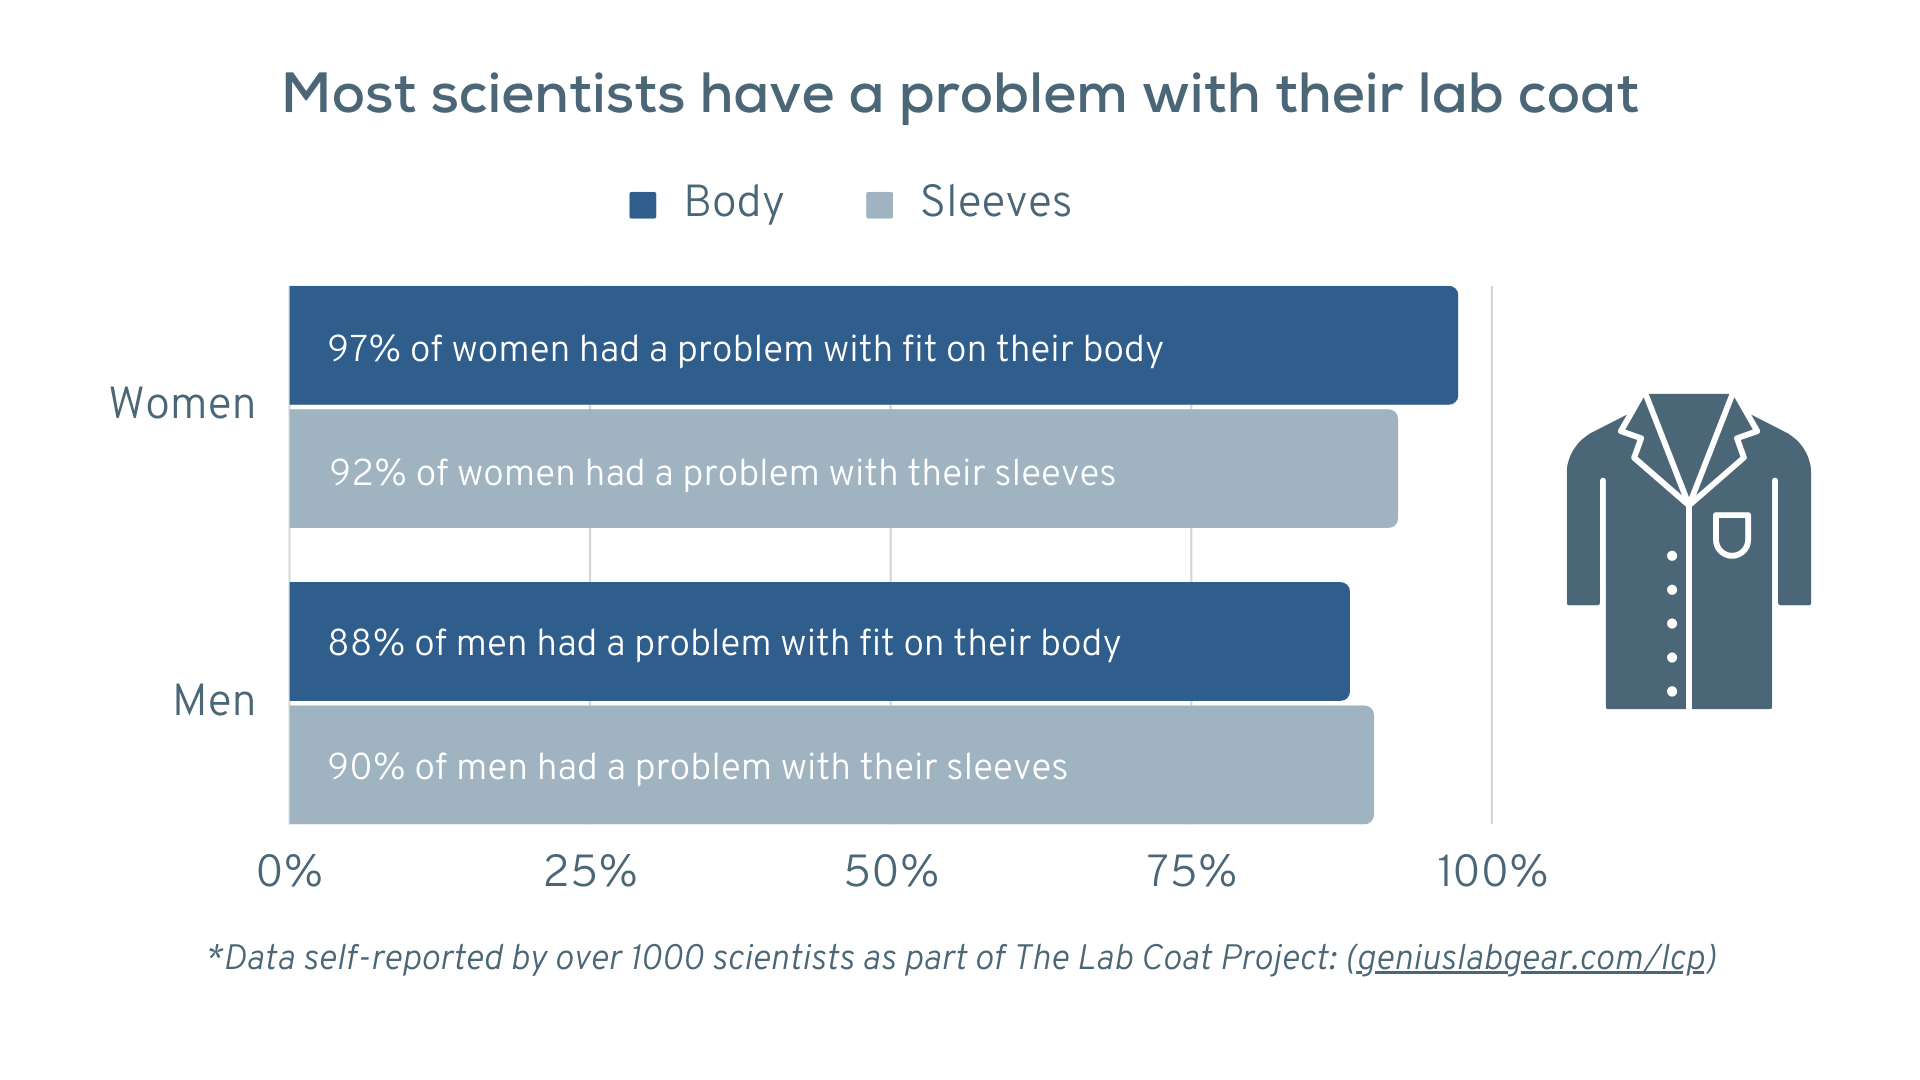 most men and women have fit problems with their lab coat